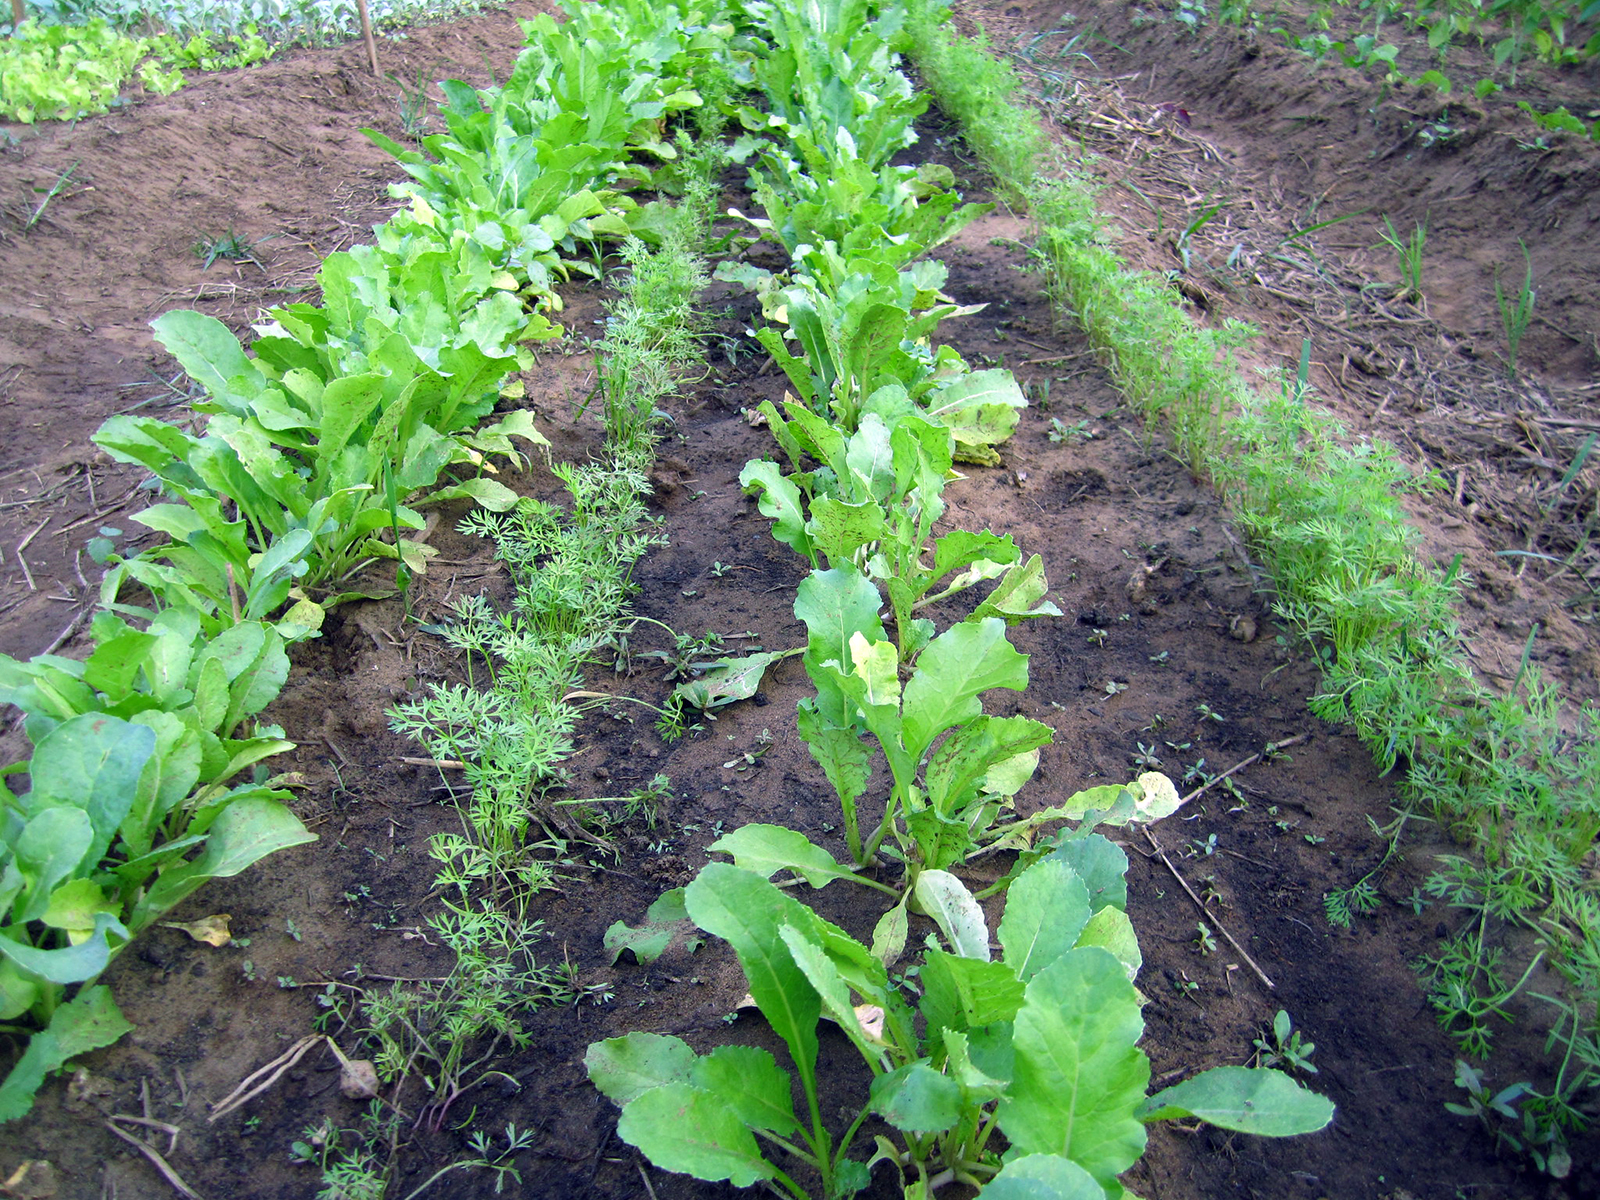 Image of Carrots and cucumbers planted together in alternating rows